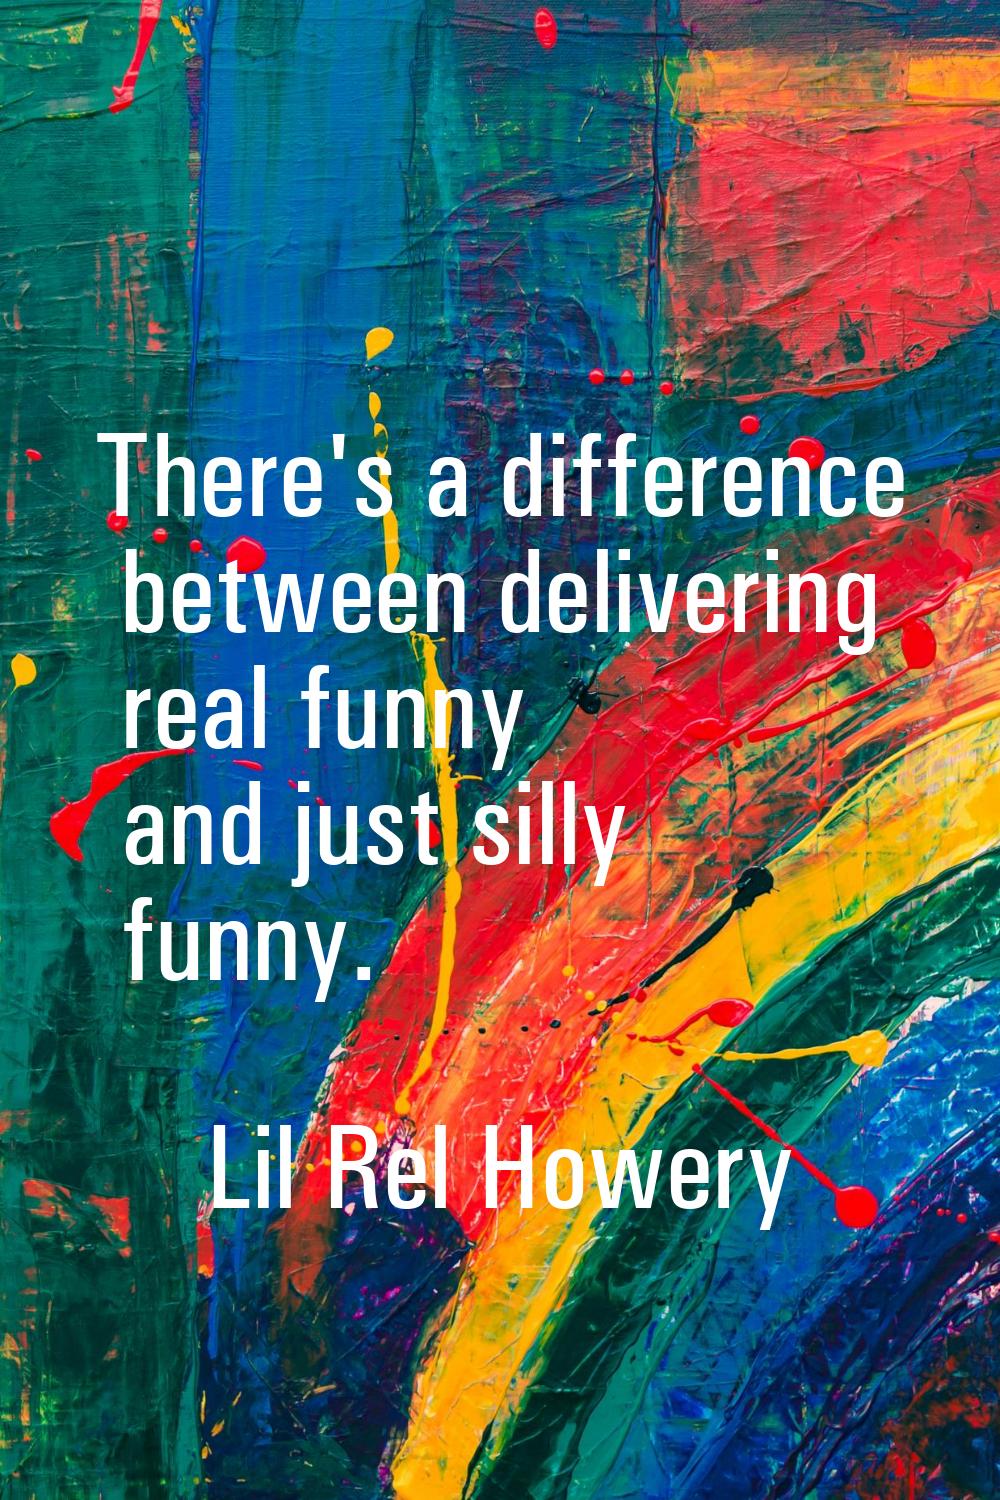 There's a difference between delivering real funny and just silly funny.